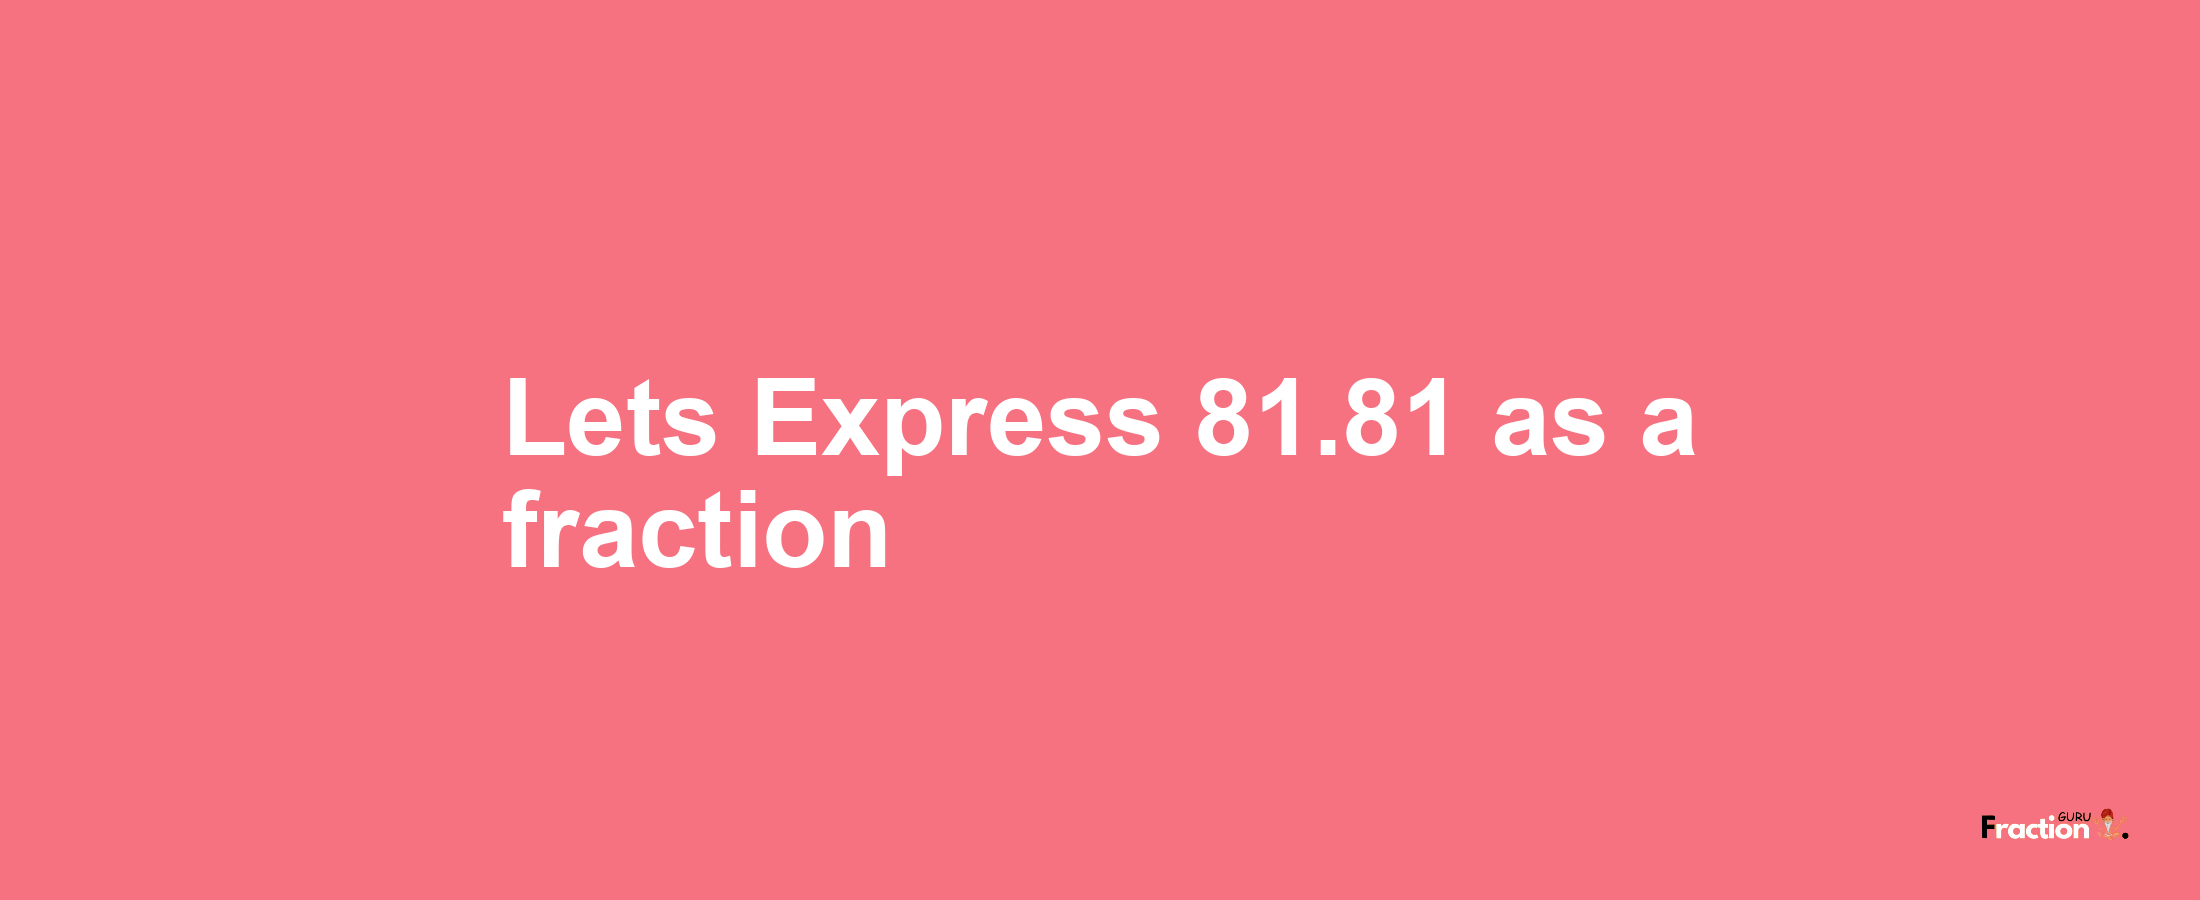 Lets Express 81.81 as afraction